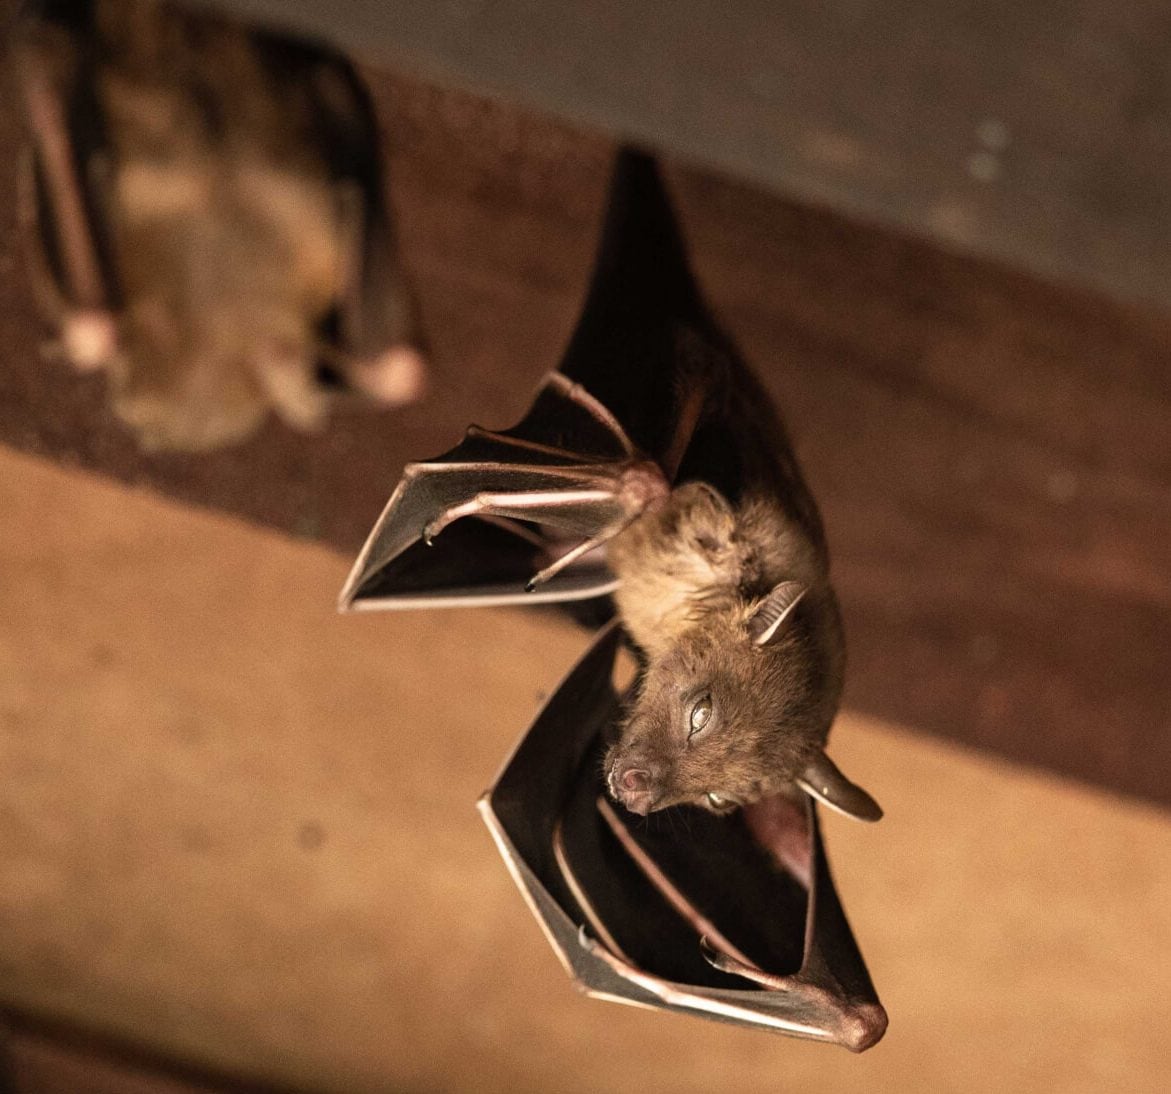 Expert bat removal services for a safe and humane solution in Alexandria